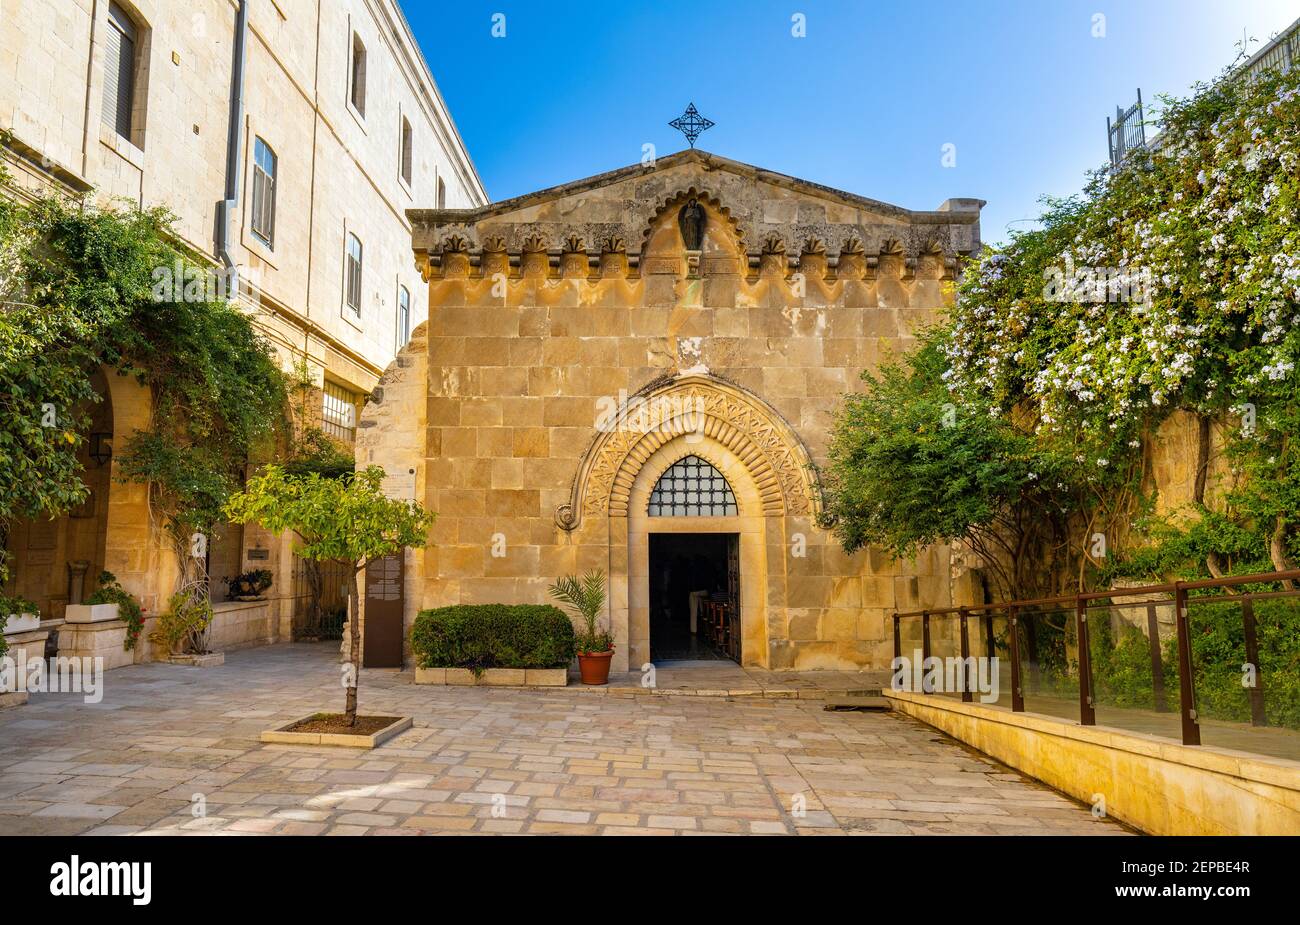 Jerusalem, Israel - October 12, 2017: Facade of medieval Church of the Flagellation at Via Dolorosa street in eastern Islamic quarter of Old City Stock Photo